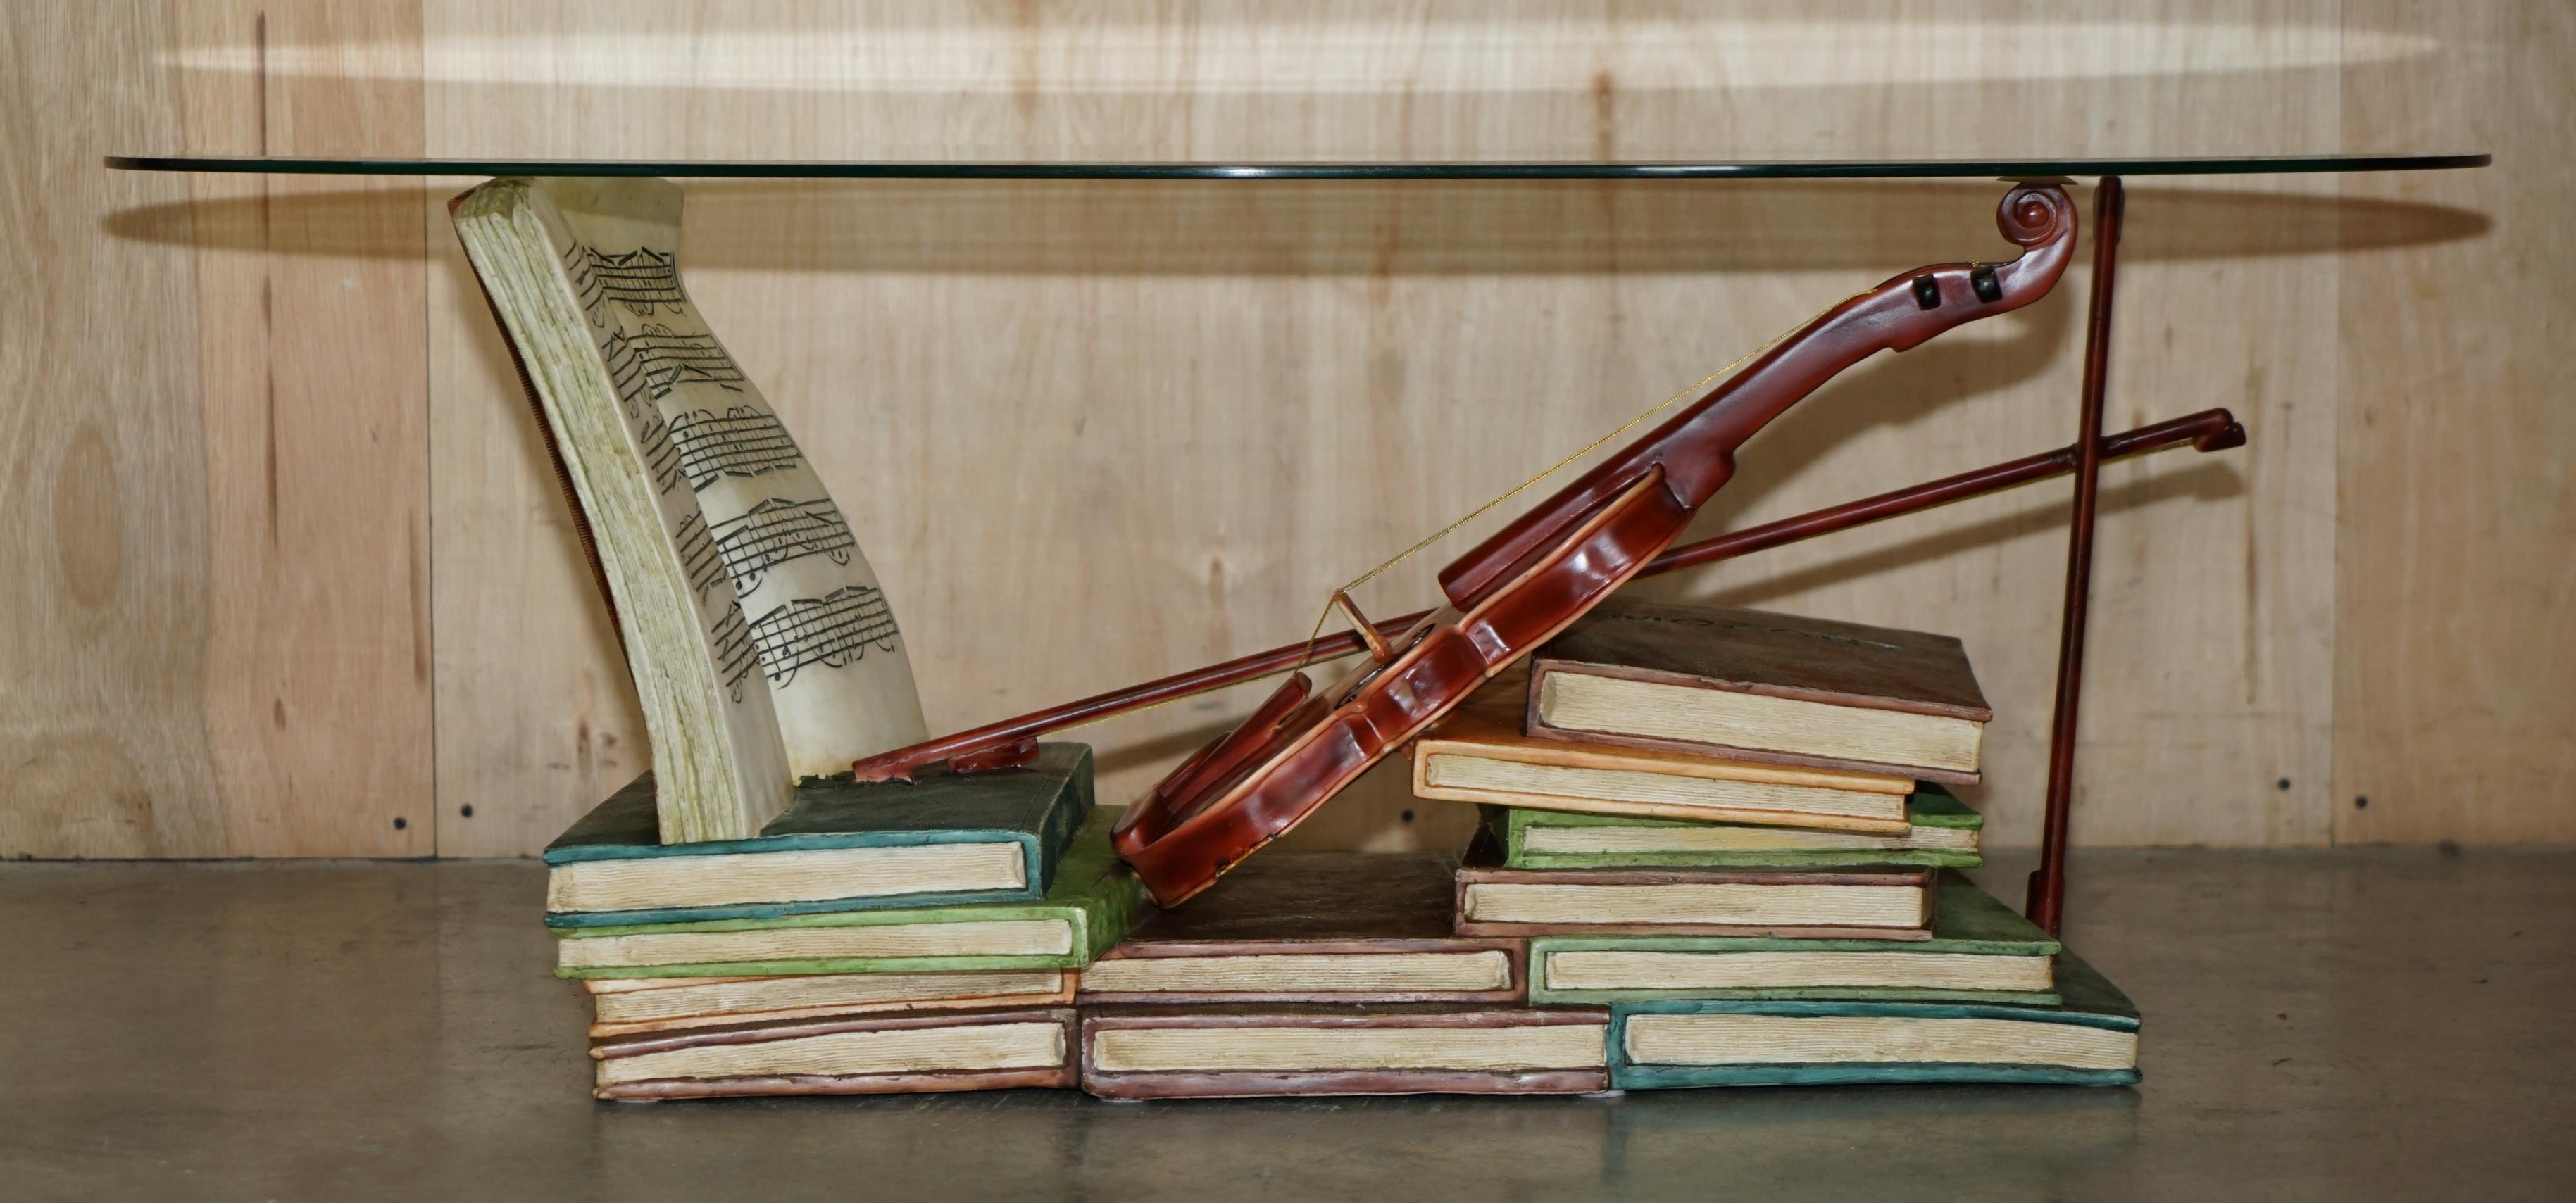 Royal House Antiques

Royal House Antiques is delighted to offer for sale this super decorative hand painted stack of books coffee table with a Violin depicting Mozart's study or music room and finished with an oval glass top 

Please note the